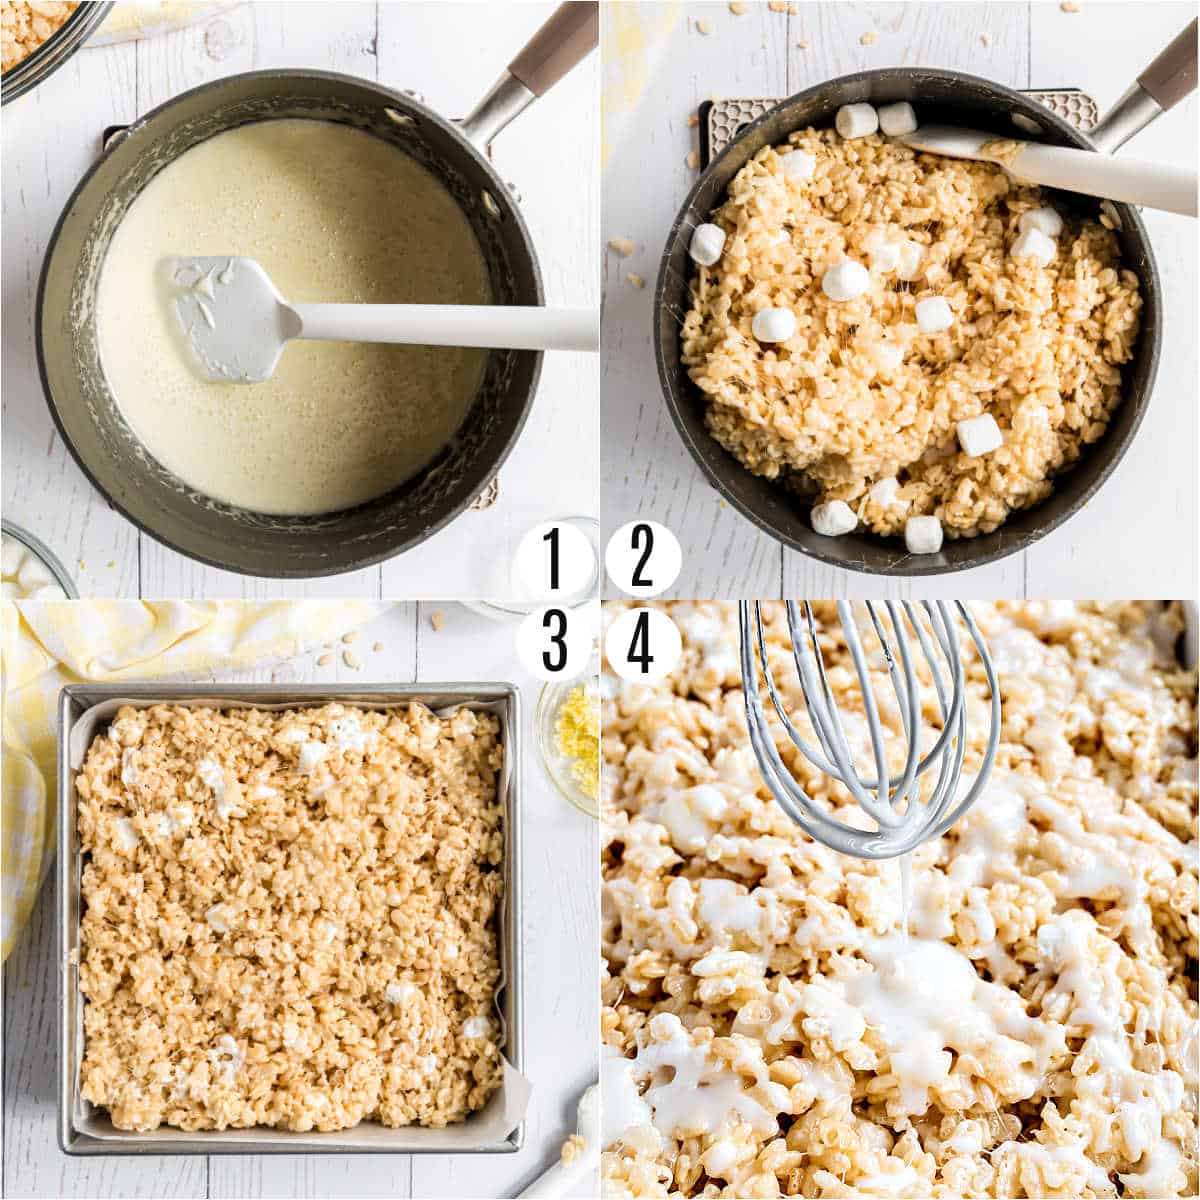 Step by step photos showing how to make lemon rice krispie treats.